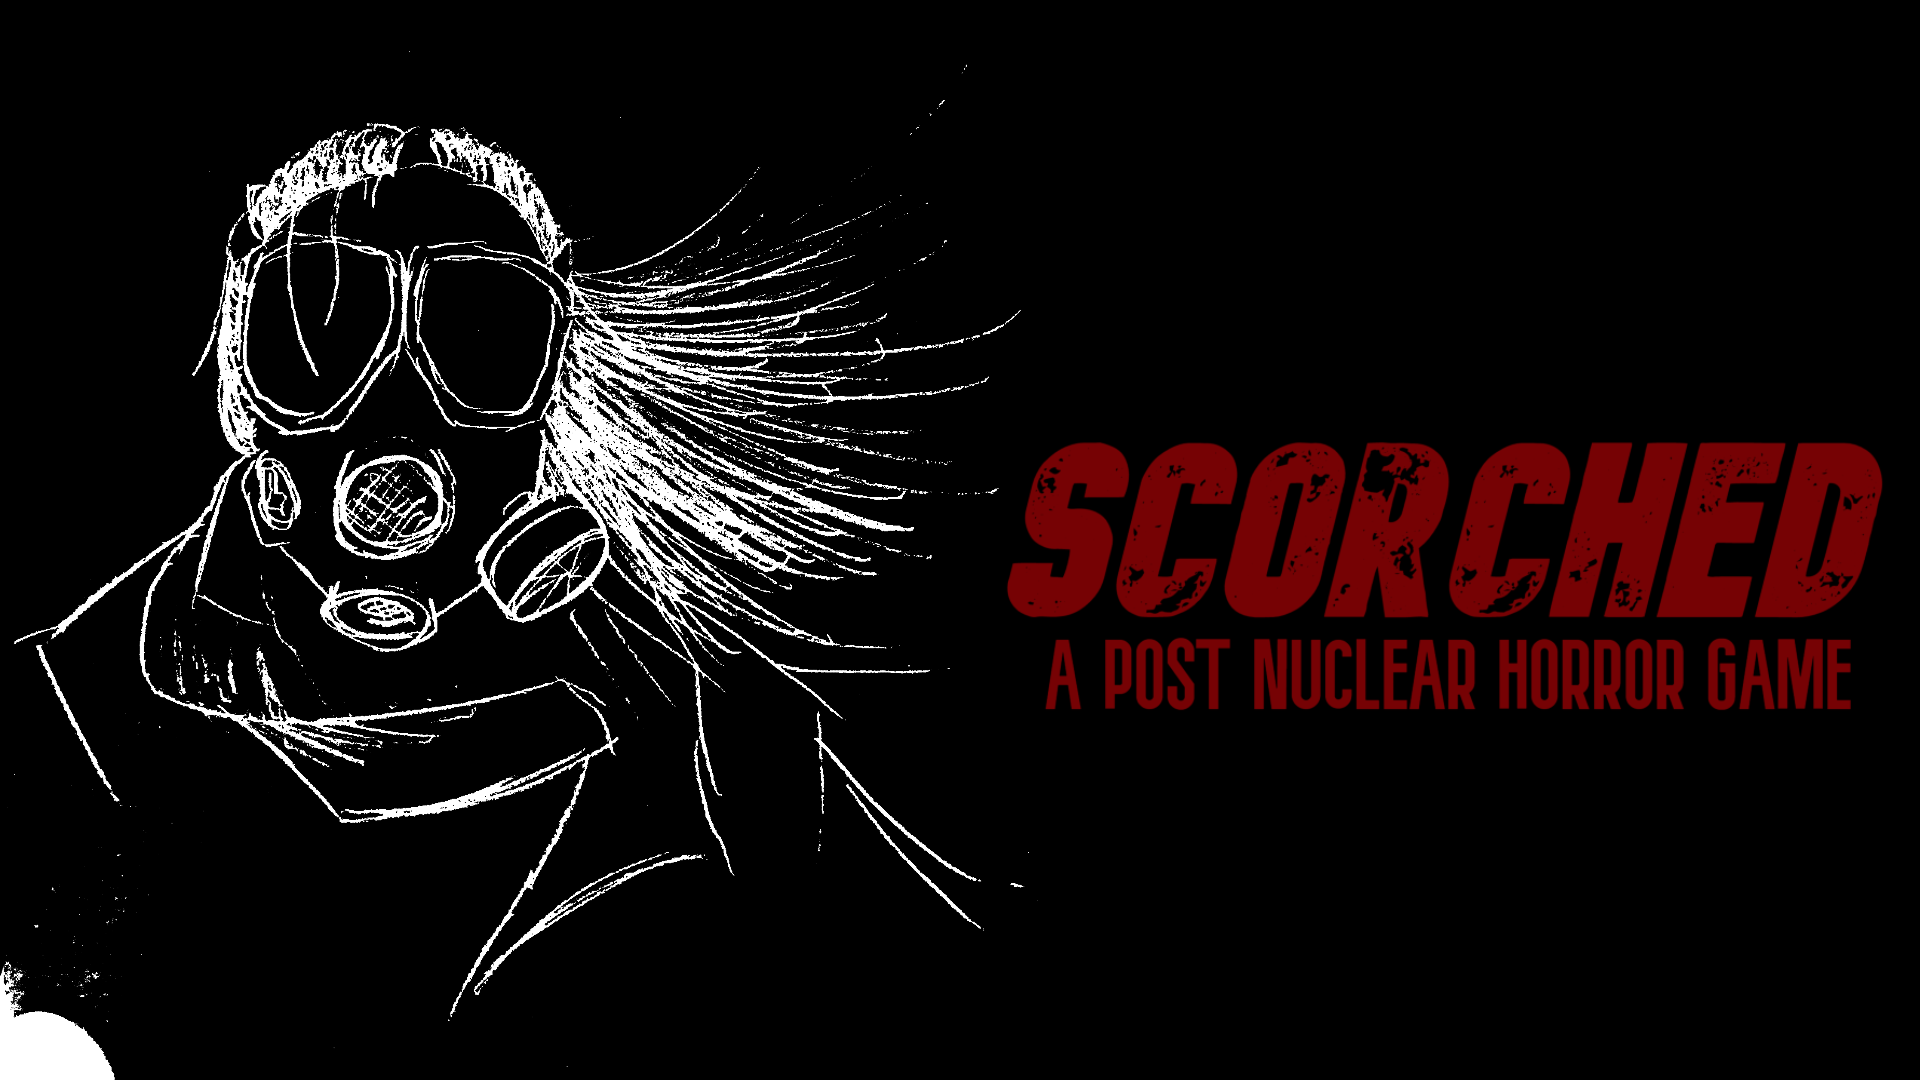 Scorched: A Post Nuclear Horror Game